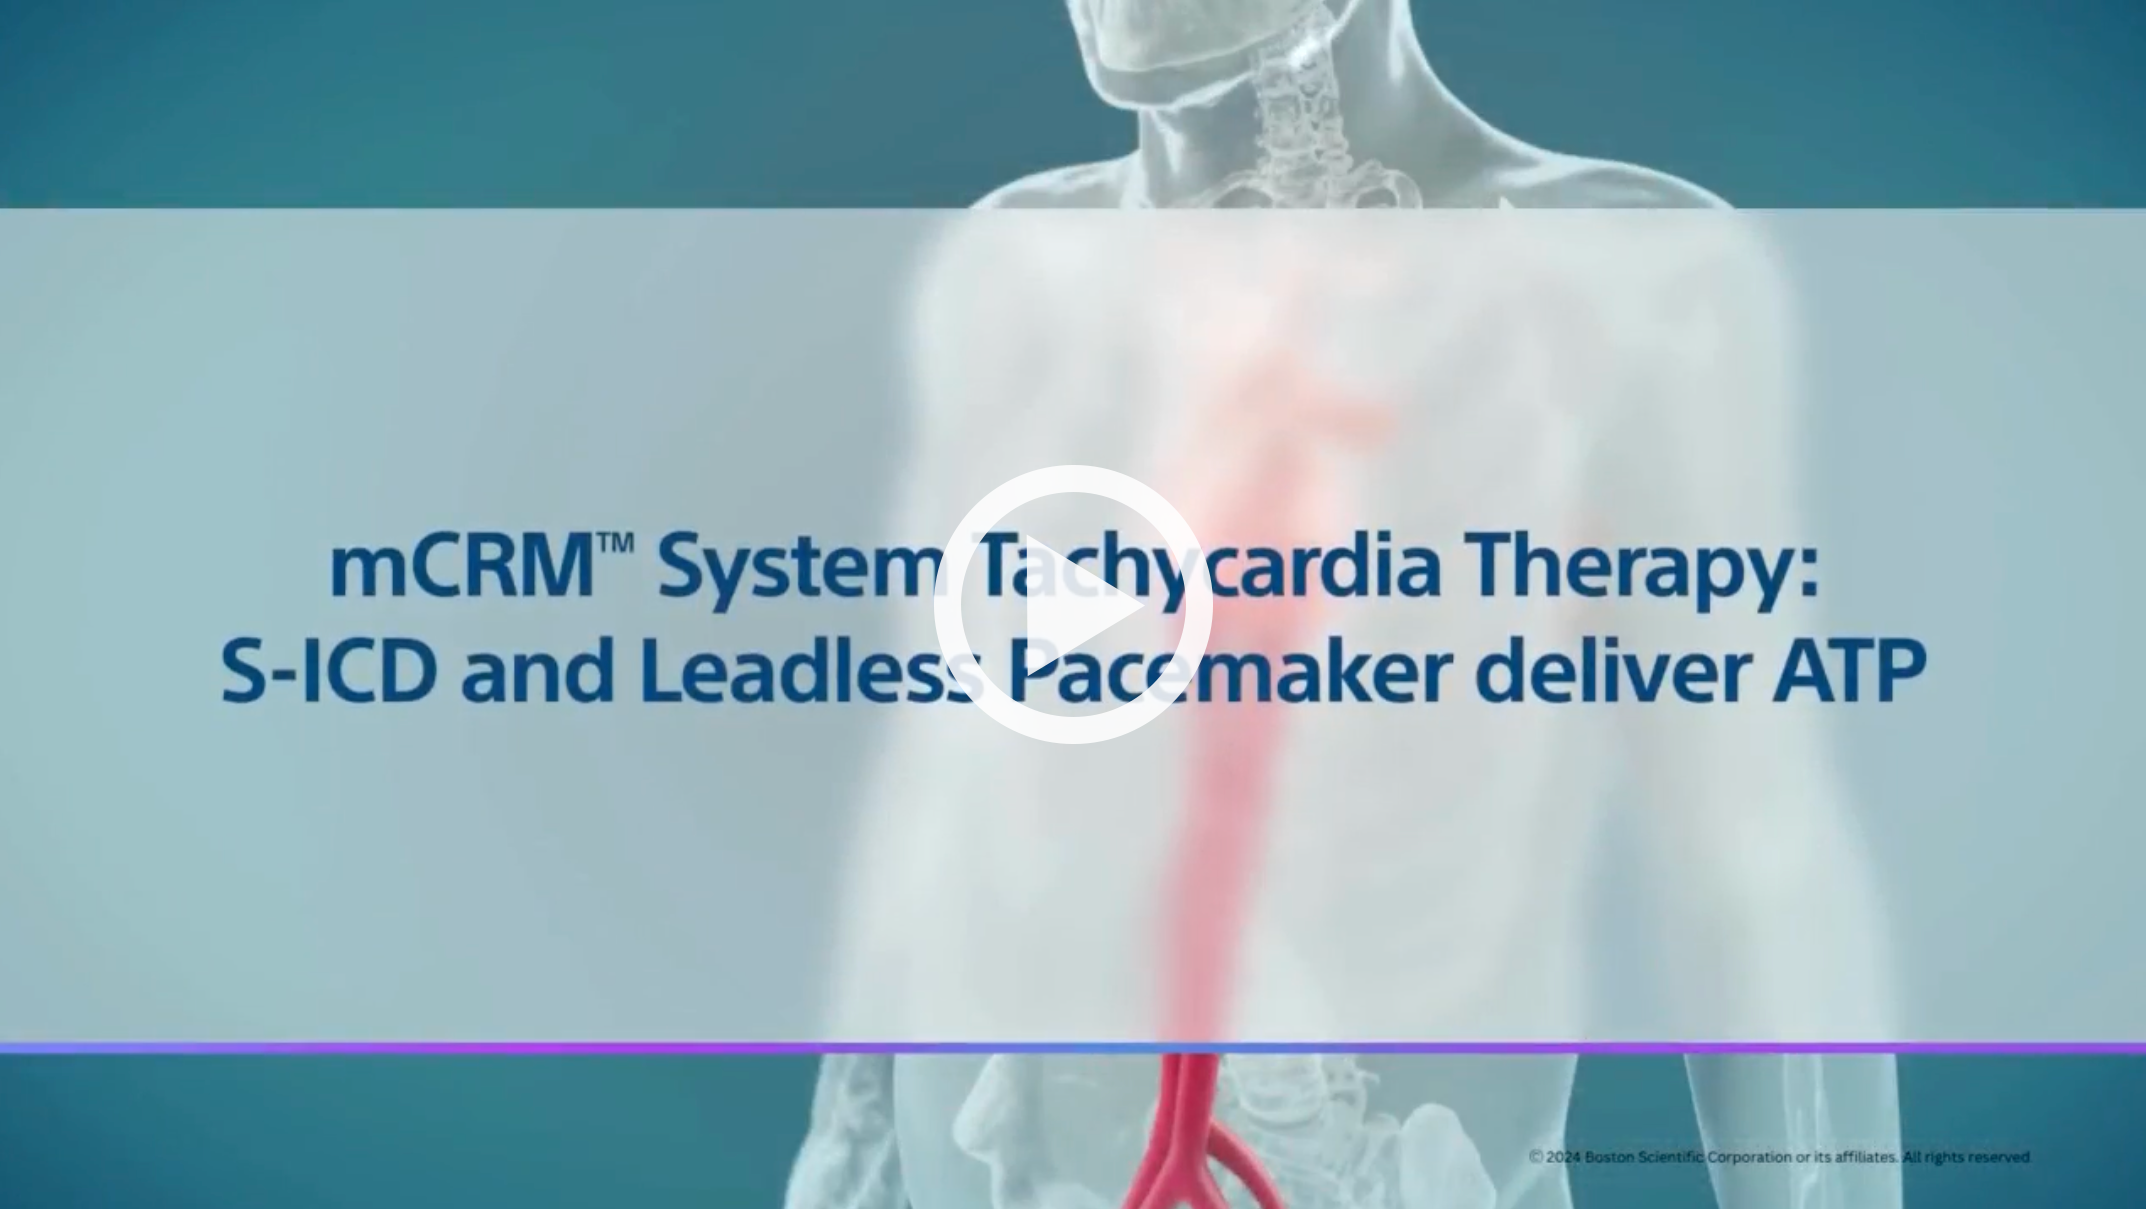 Video: mCRM System Tachycardia Therapy: S-ICD and Leadless Pacemaker deliver ATP.